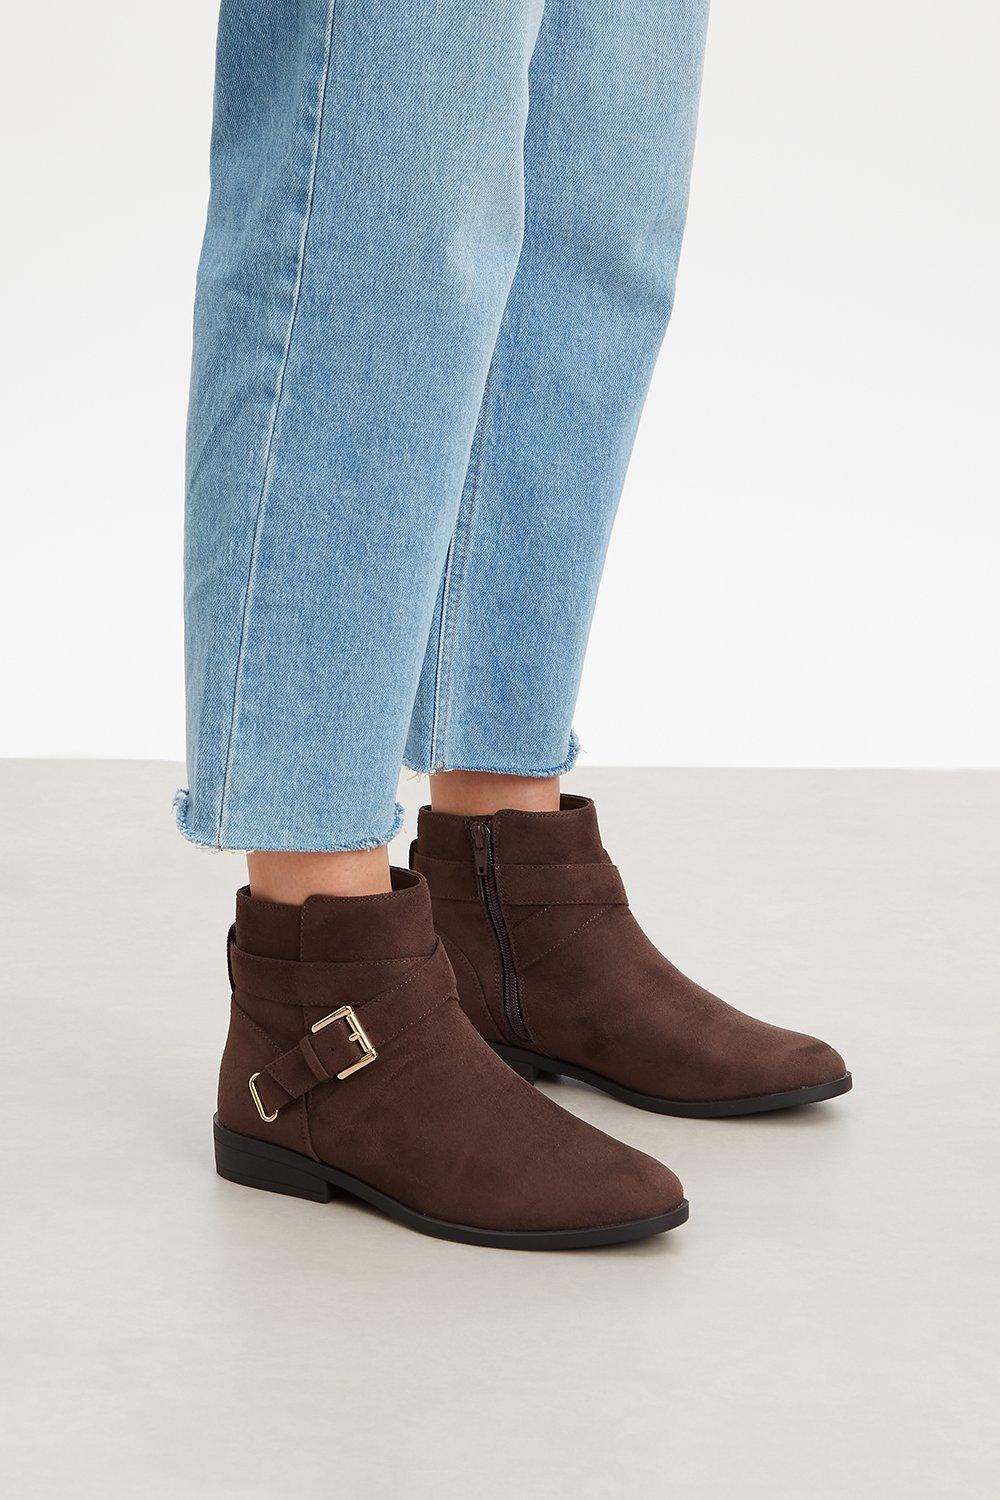 Womens Principles: Myra Wrap Buckle Ankle Boots